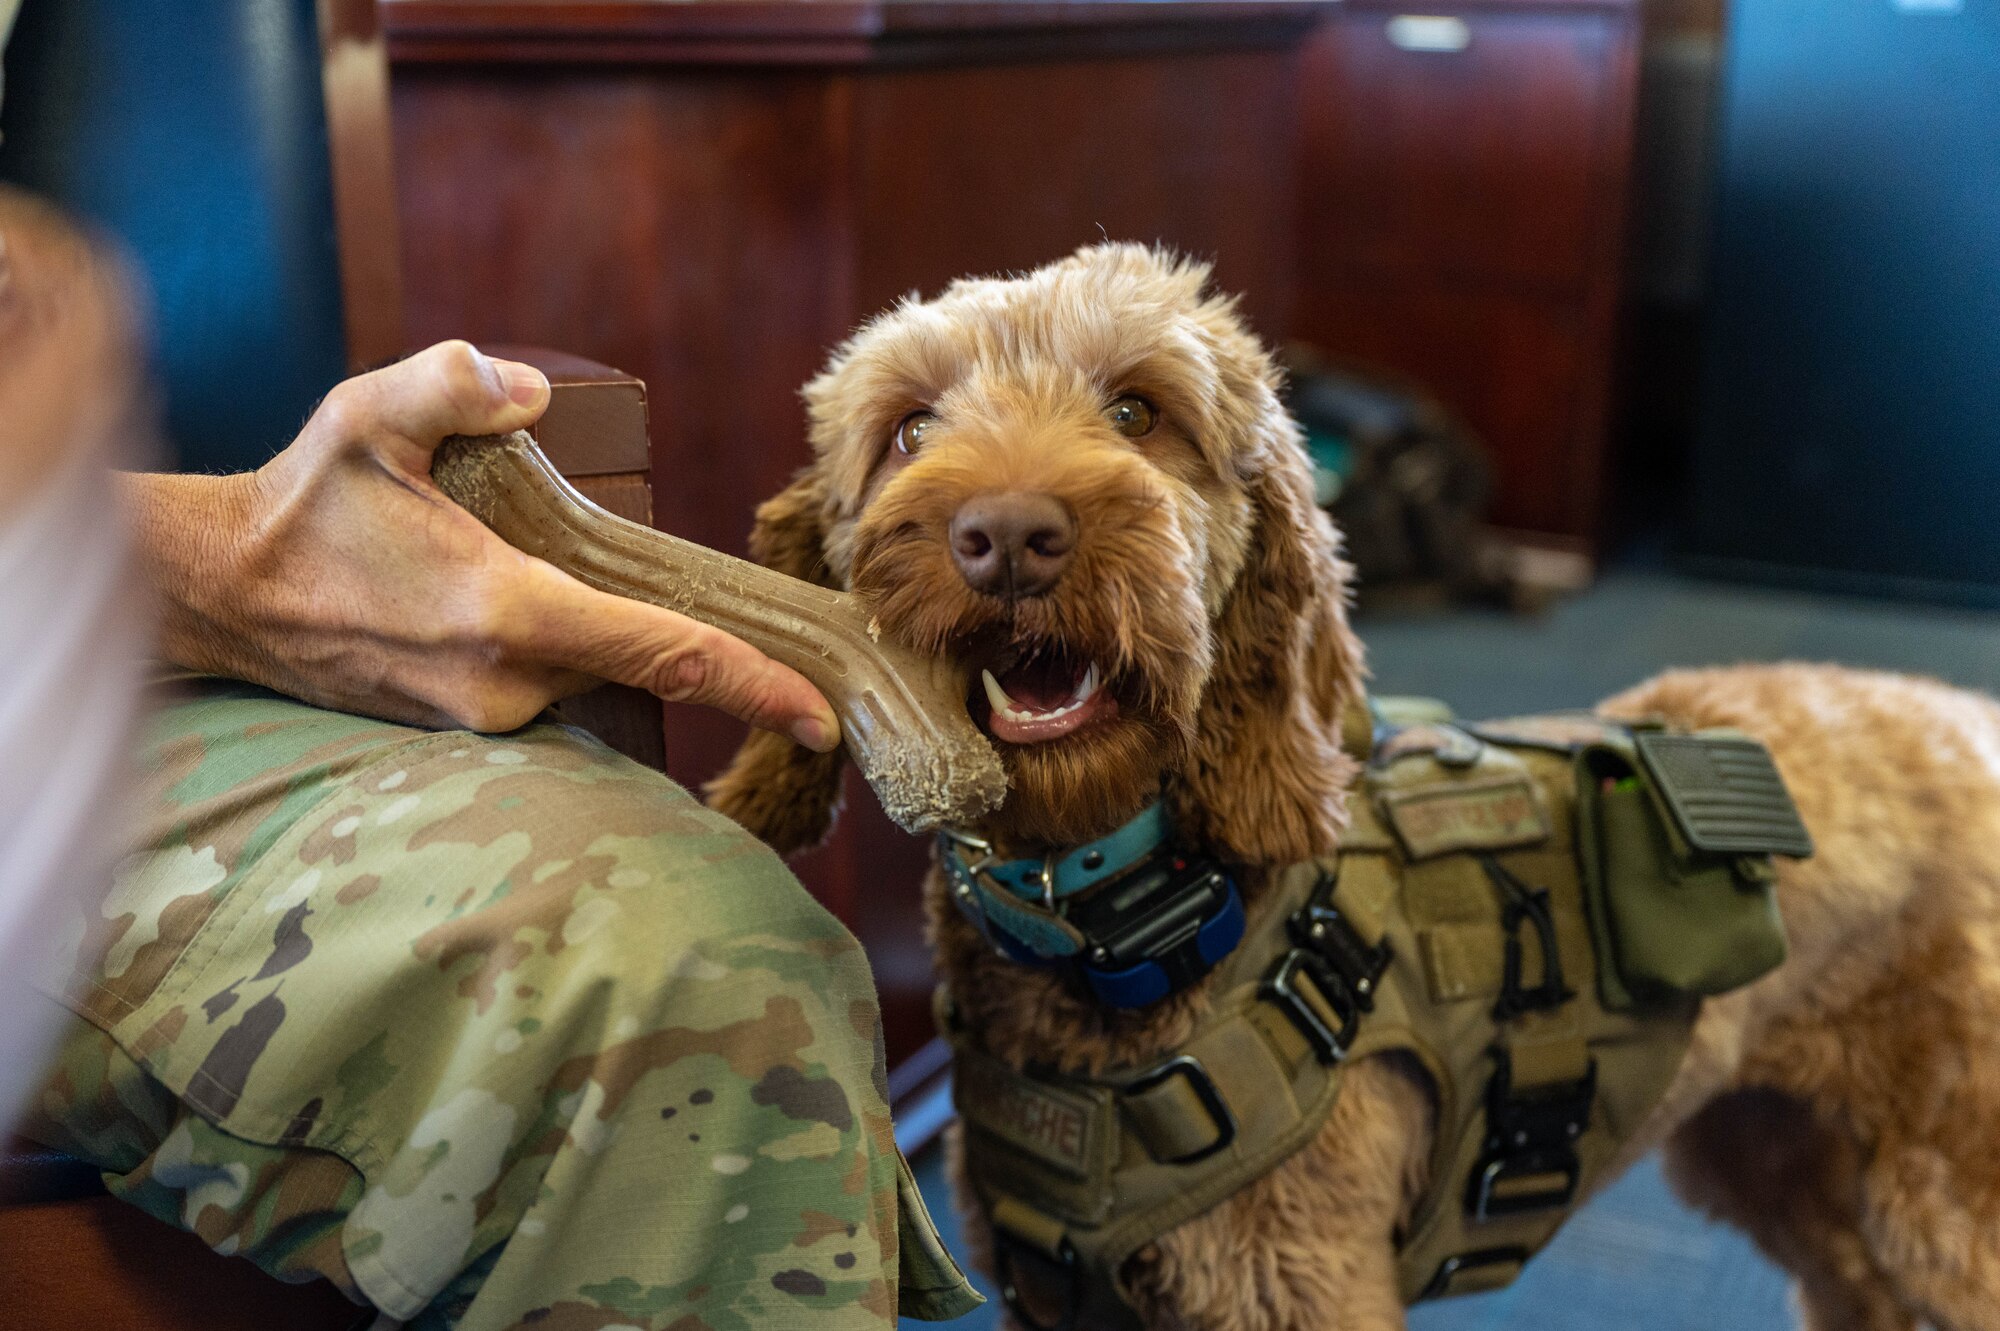 U.S. Air Force Col. Adam Roberts', the 555 RED HORSE Squadron commander, service dog, Porsche, chews on a toy at Nellis Air Force base, Nevada, September 20, 2022. Roberts trained Porsche to assist with his sleep paralysis and to engage with fellow Airmen by accepting vulnerability.